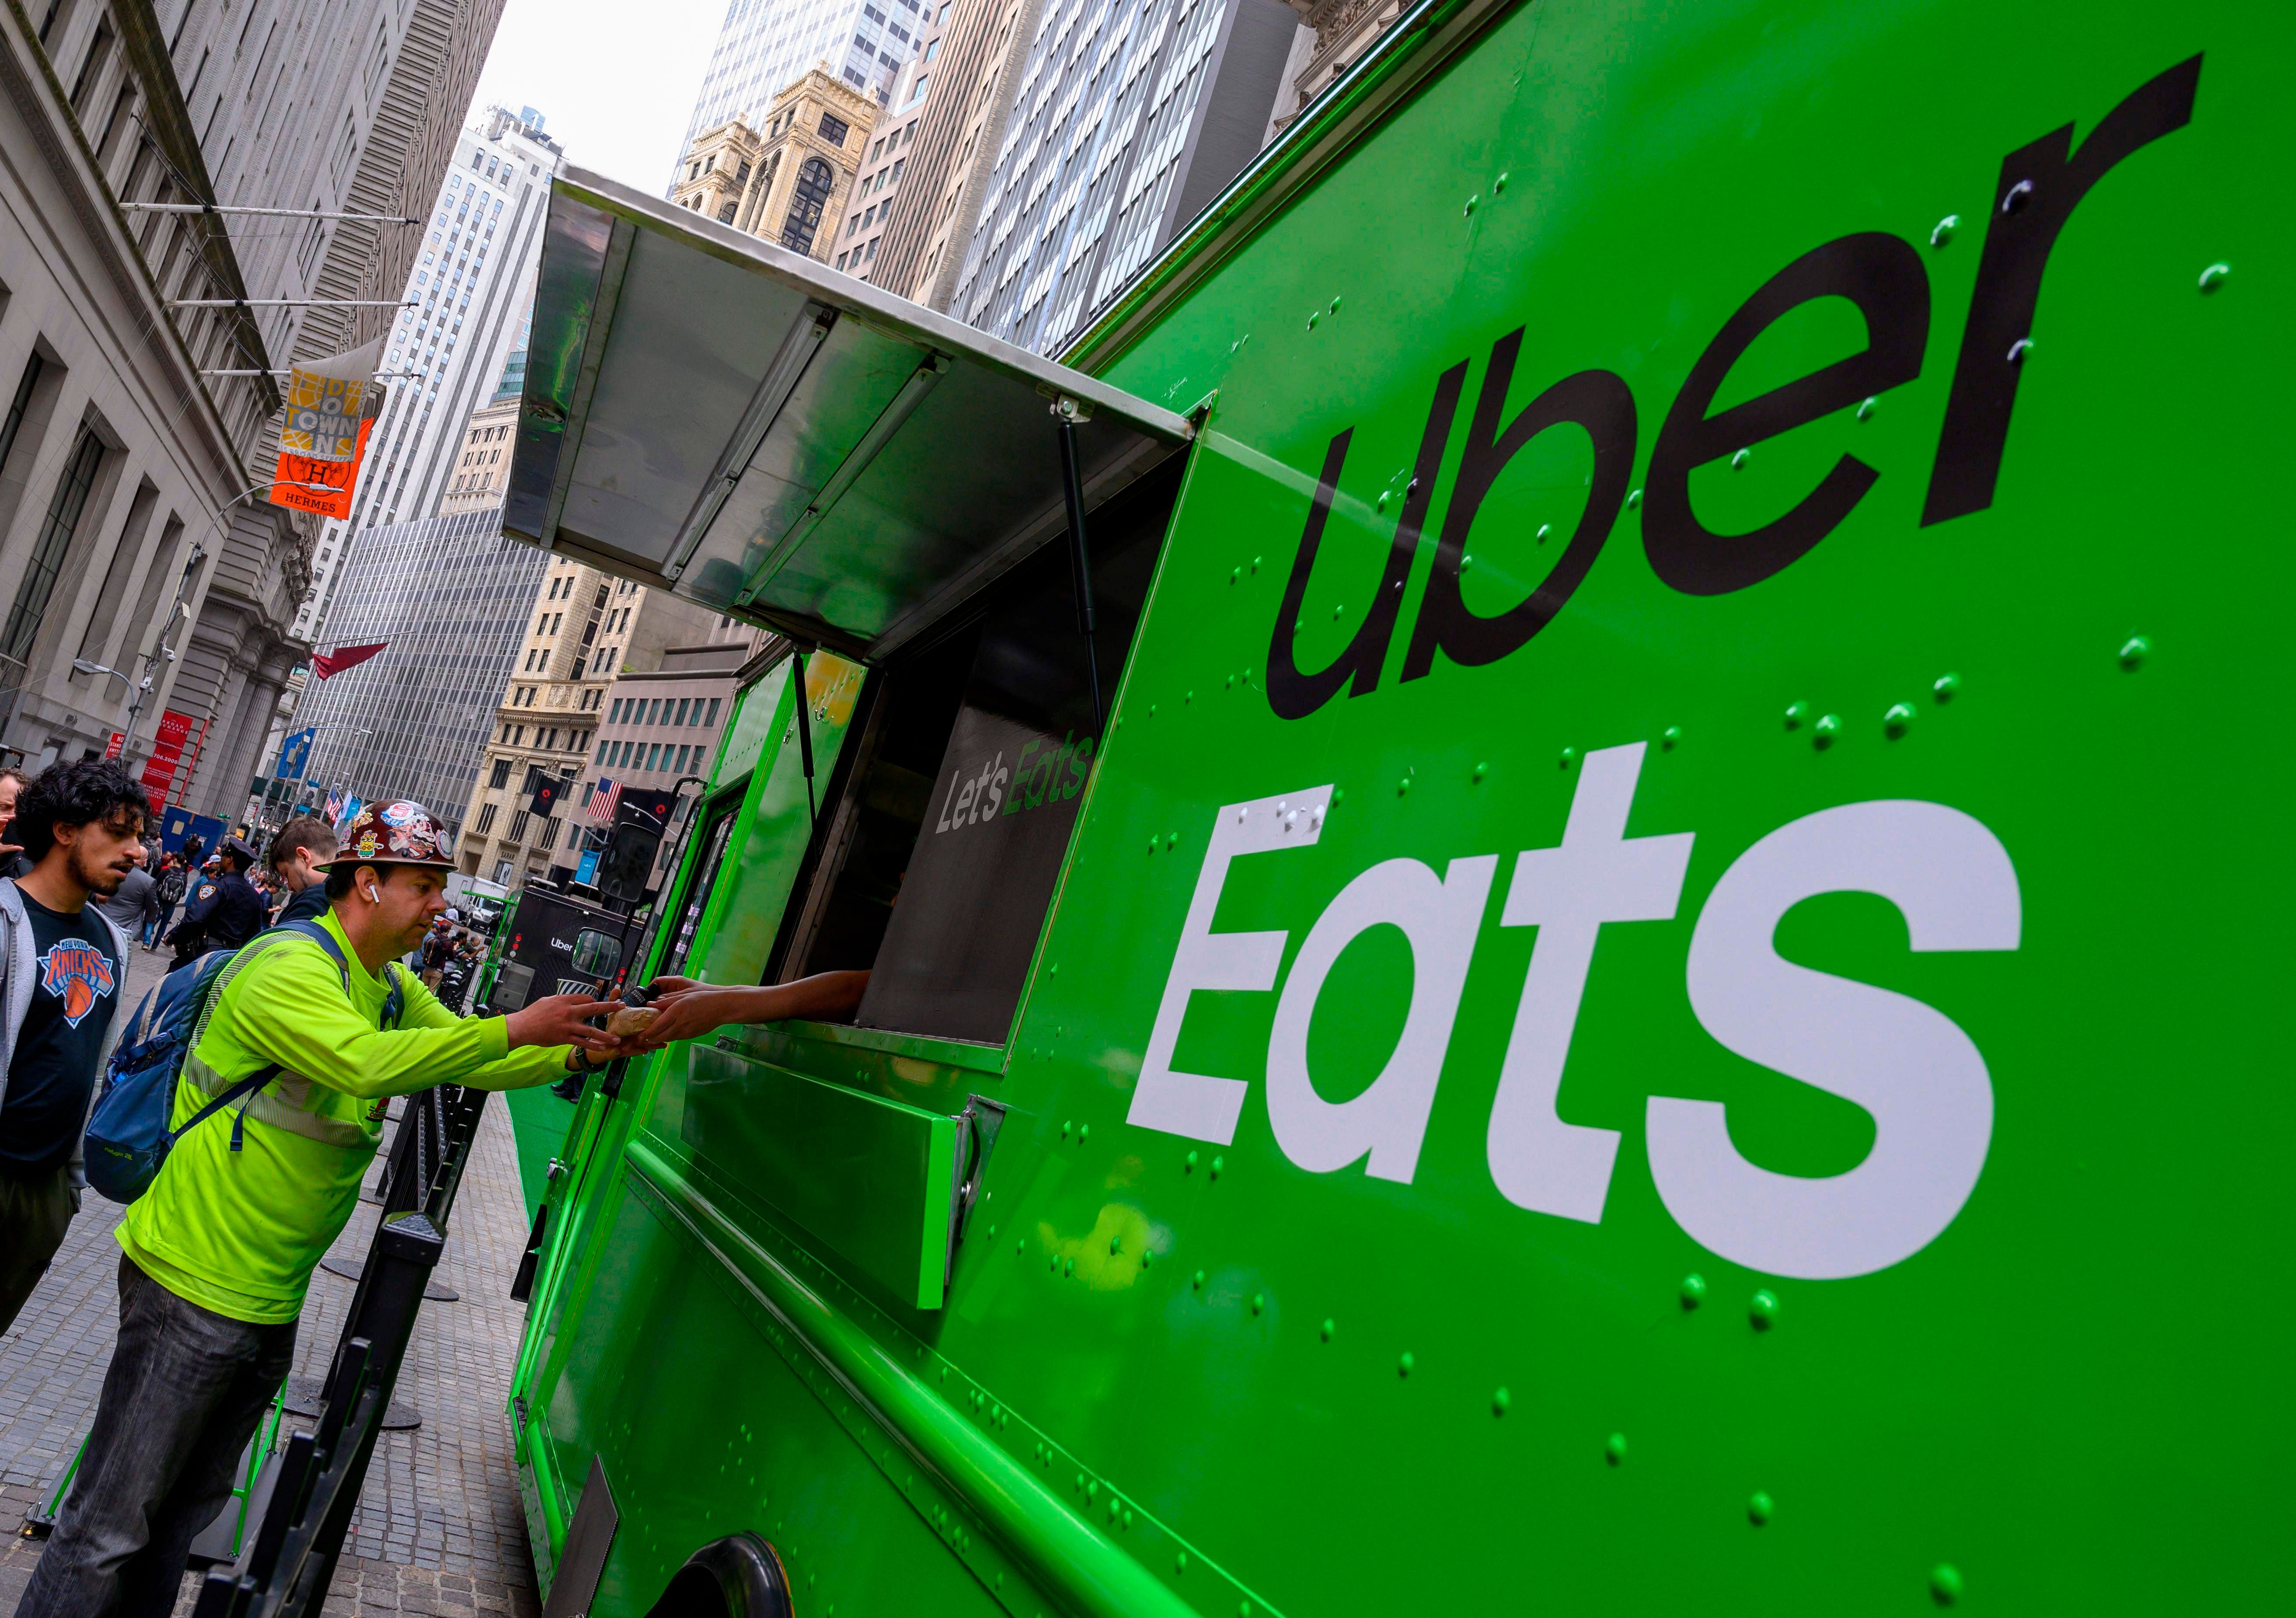 People buy food from an Uber Eats truck. (AFP Photo)